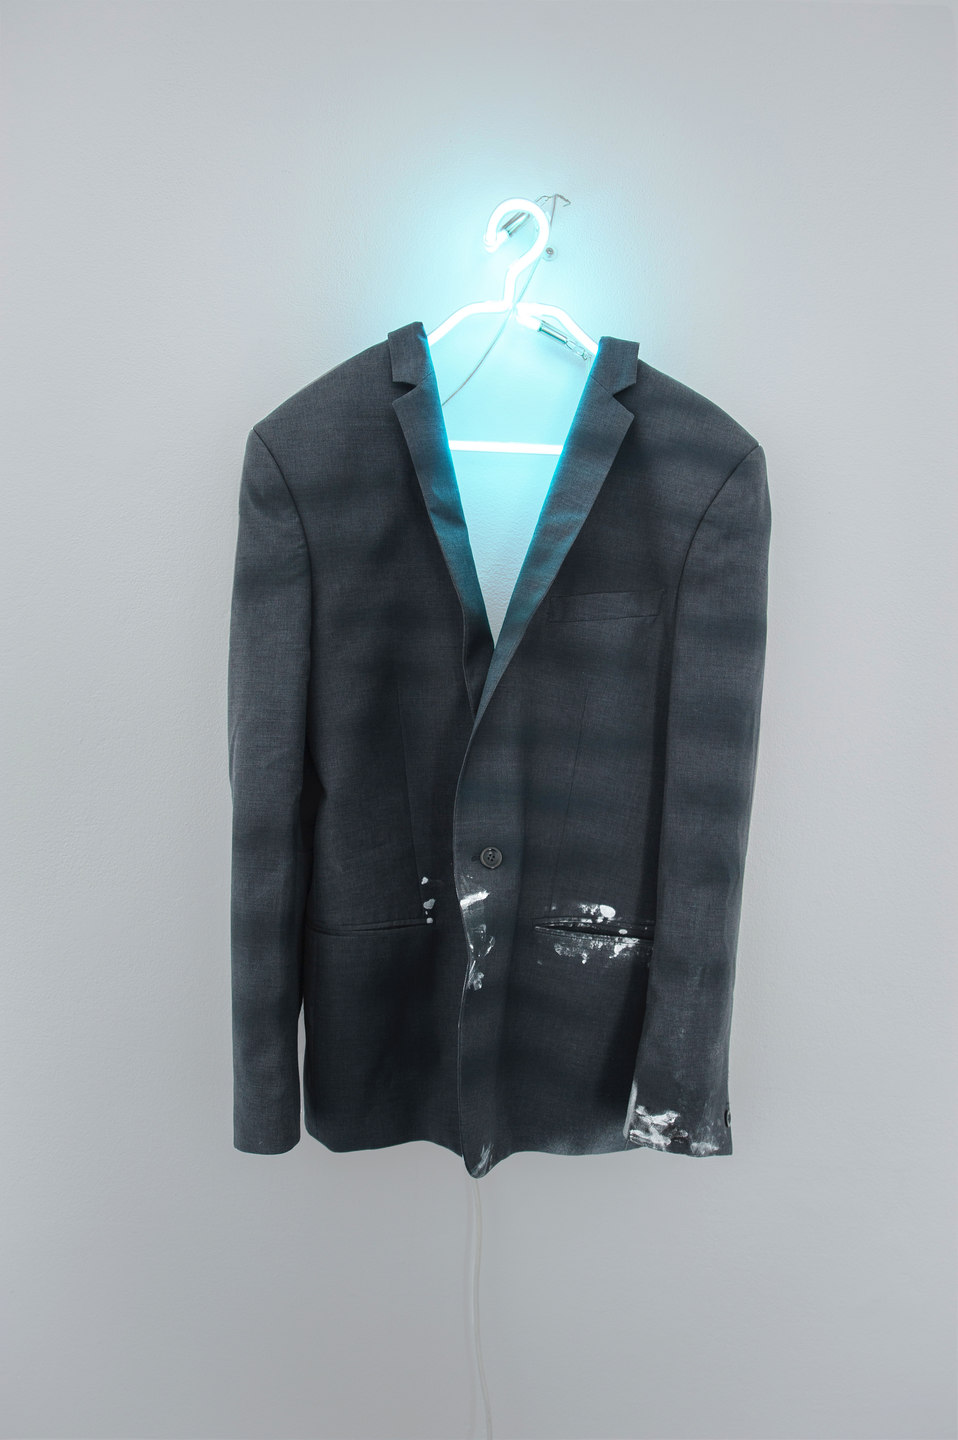 Florian Auer, From Nine to Five, 2013, neon, jacket, airbrushed paint, (75 x 135 x 75 cm)